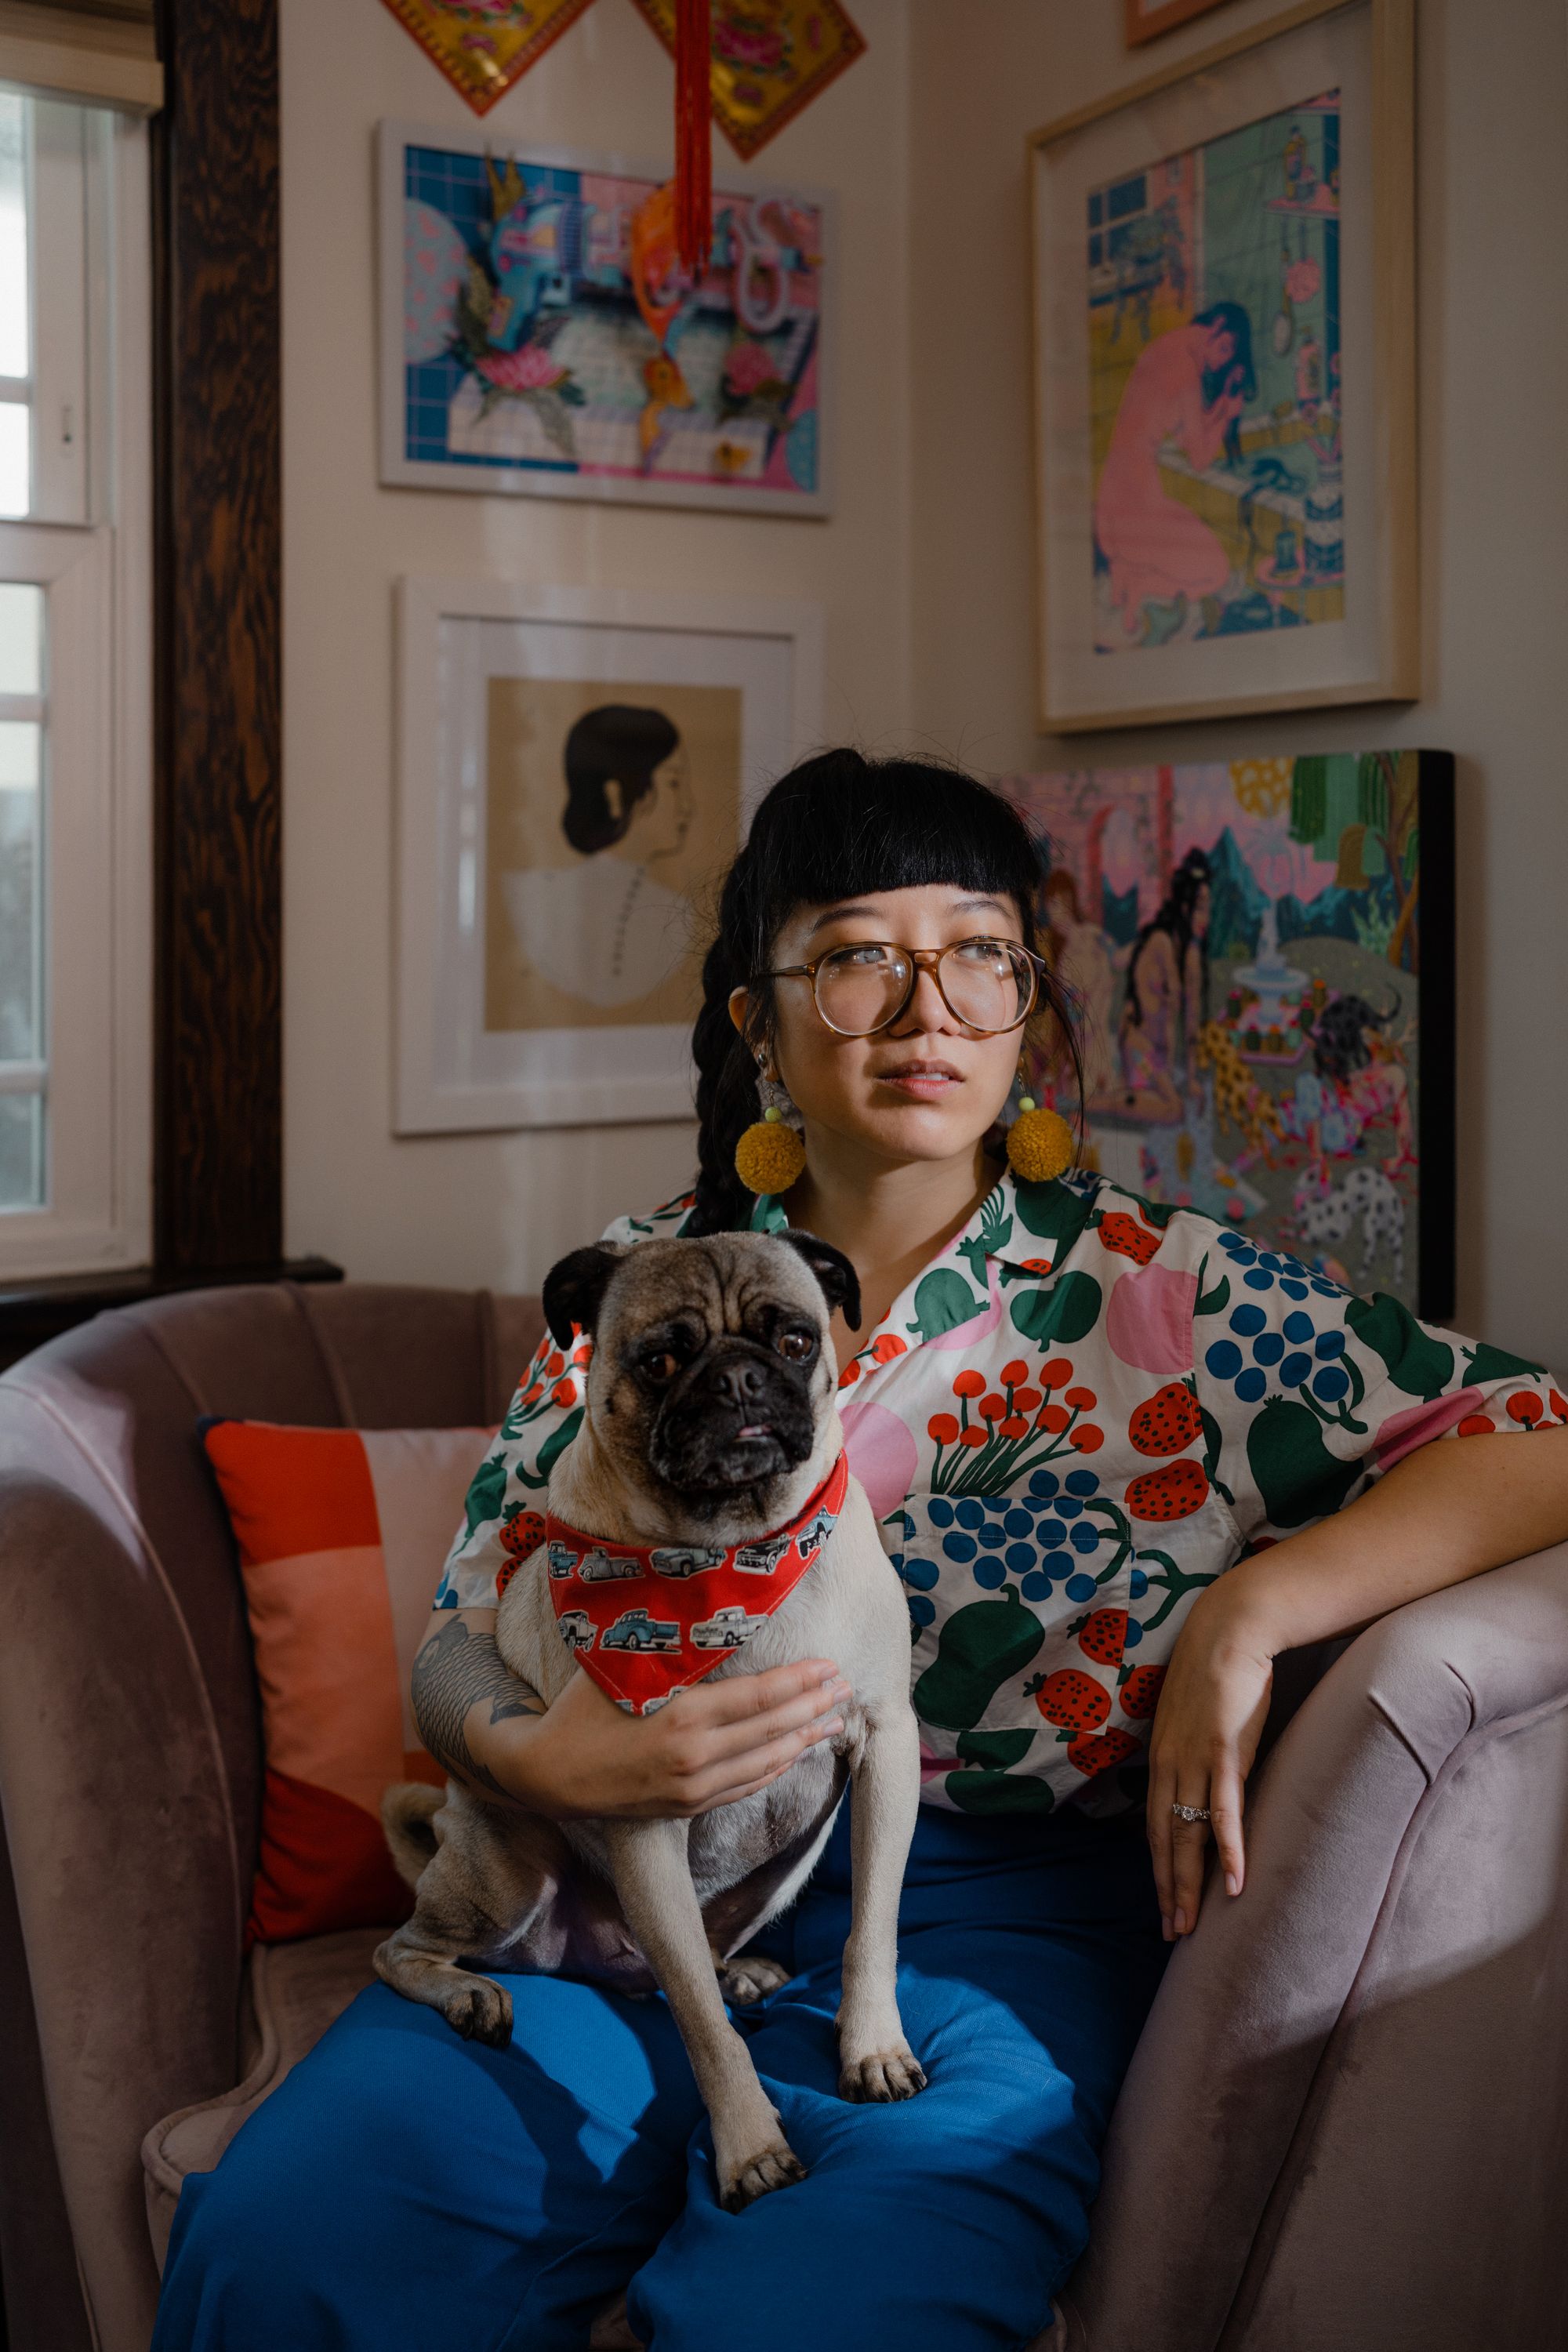 Photographic portrait of painter and illustrator Kristen Liu-Wong sitting on a plush chair in her home studio holding her pet pug named Rooster.